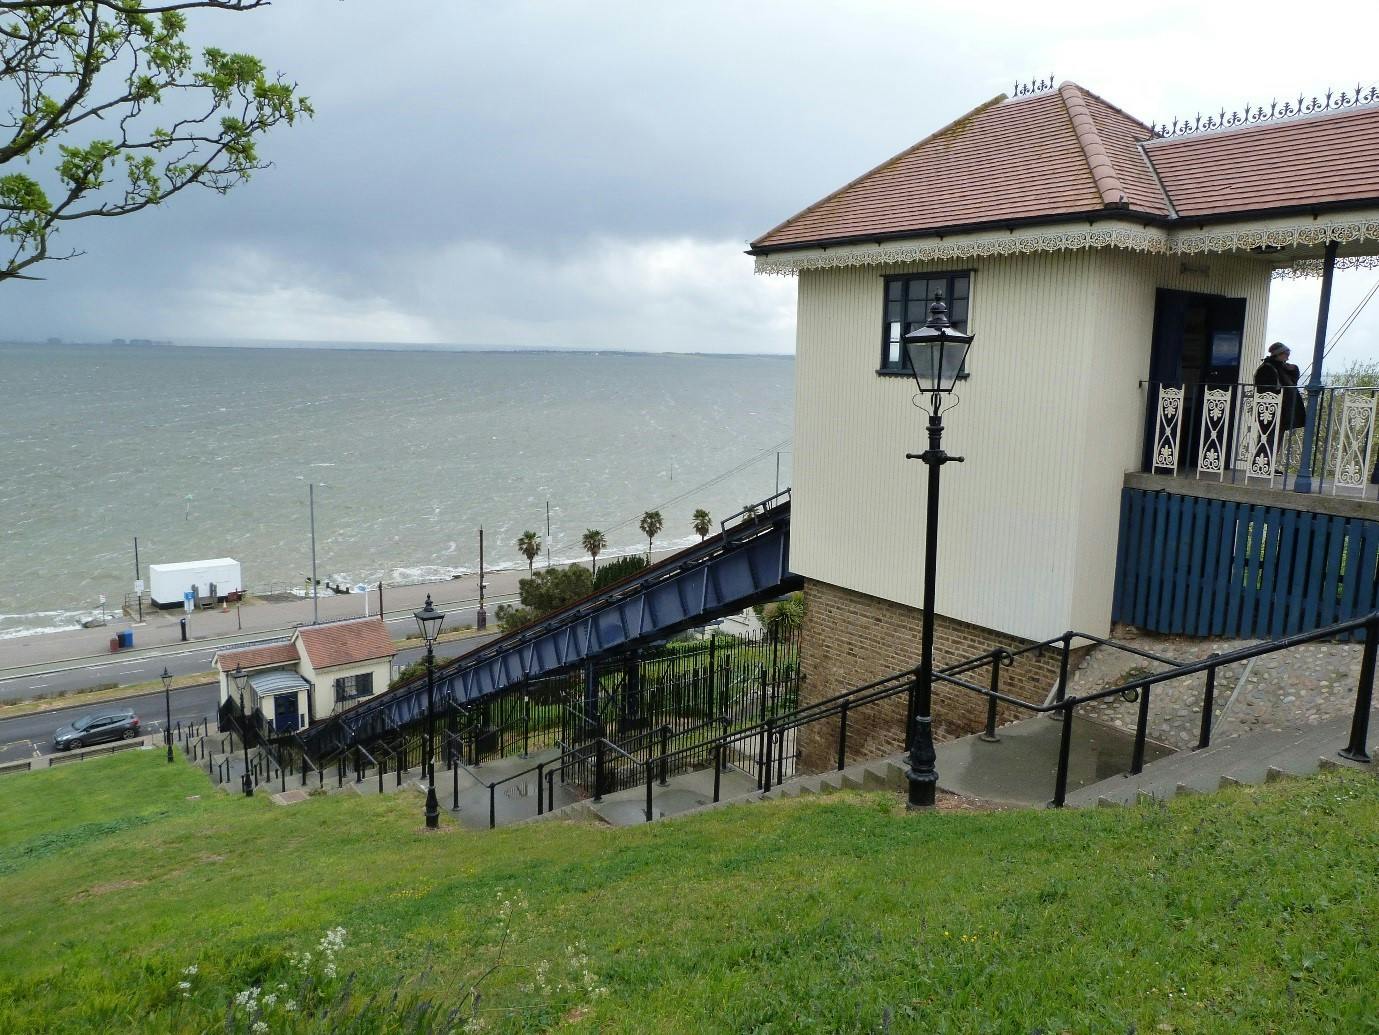 The funicular railway on the edge of the Clifftown Conservation Area